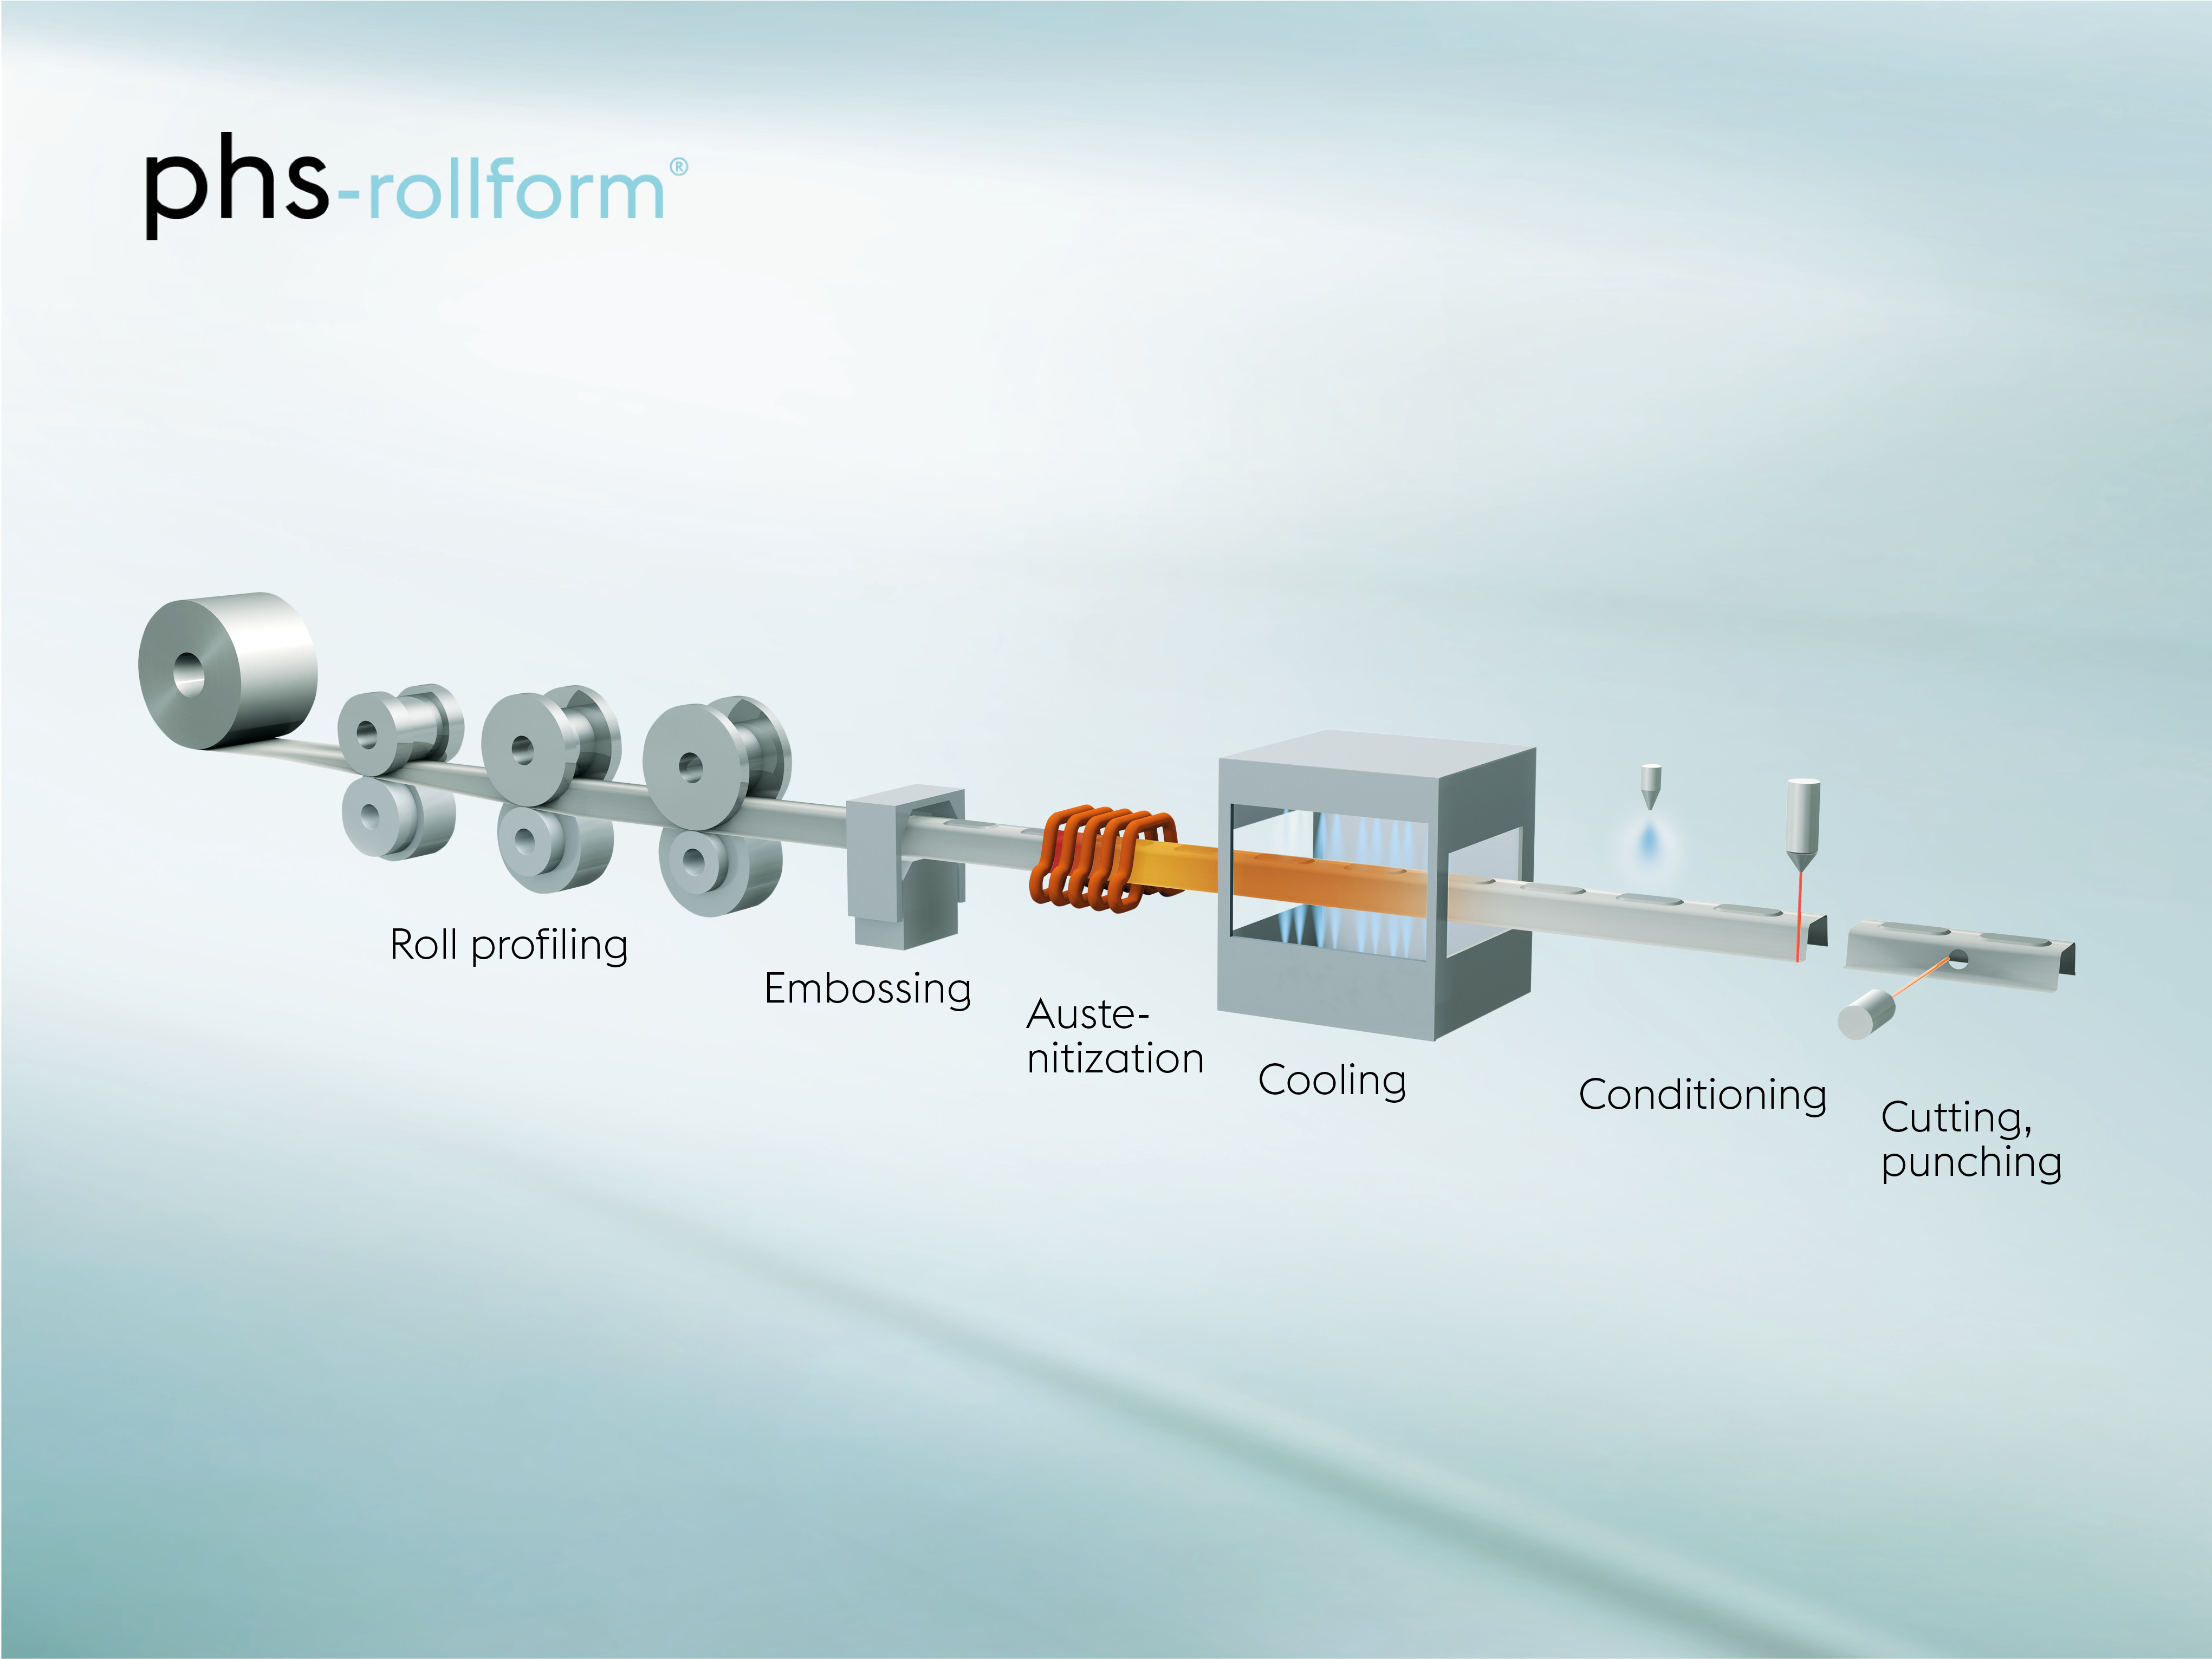 phs-rollform® for roll-formed and press-hardened components made of a single material